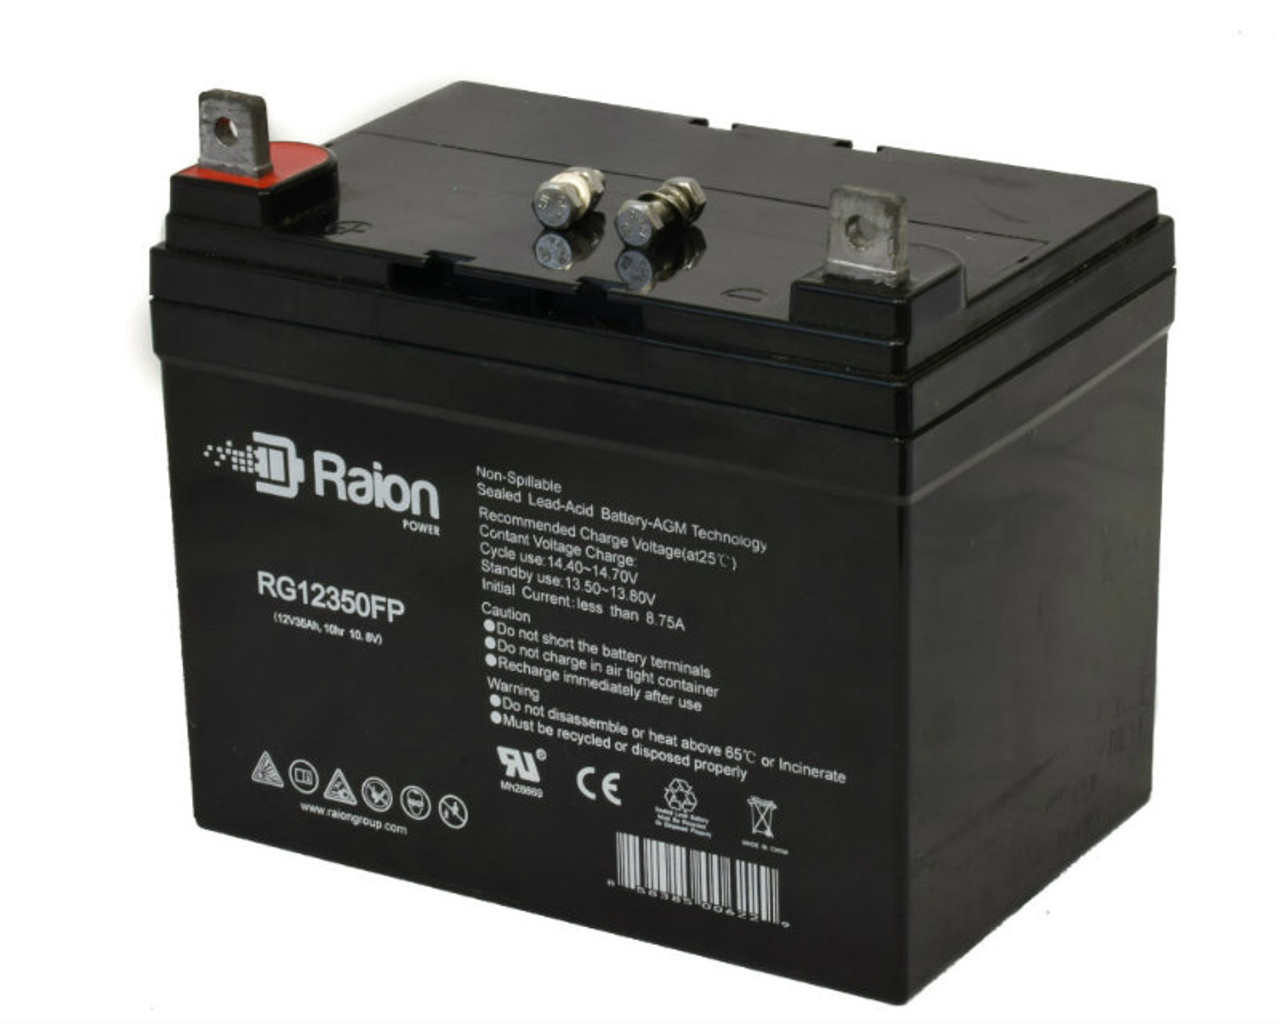 Raion Power Replacement 12V 35Ah RG12350FP Battery for Case International 448